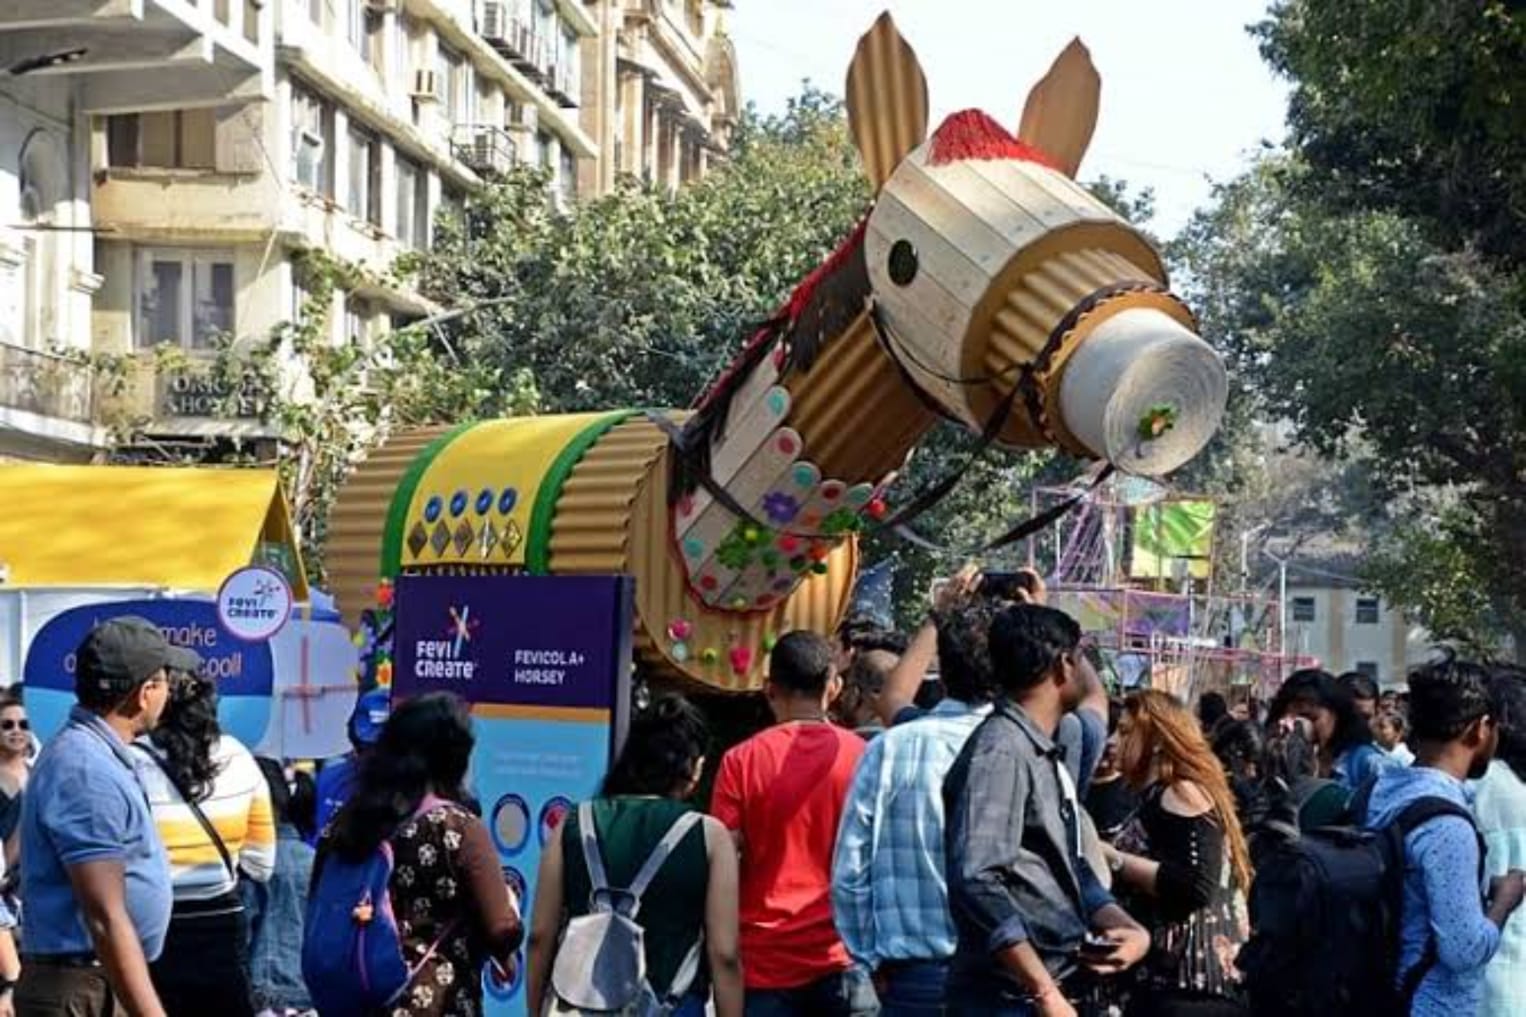 The Kala Ghoda area of Mumbai, where the festival is held, is close to the great Hotels near Gateway of India.